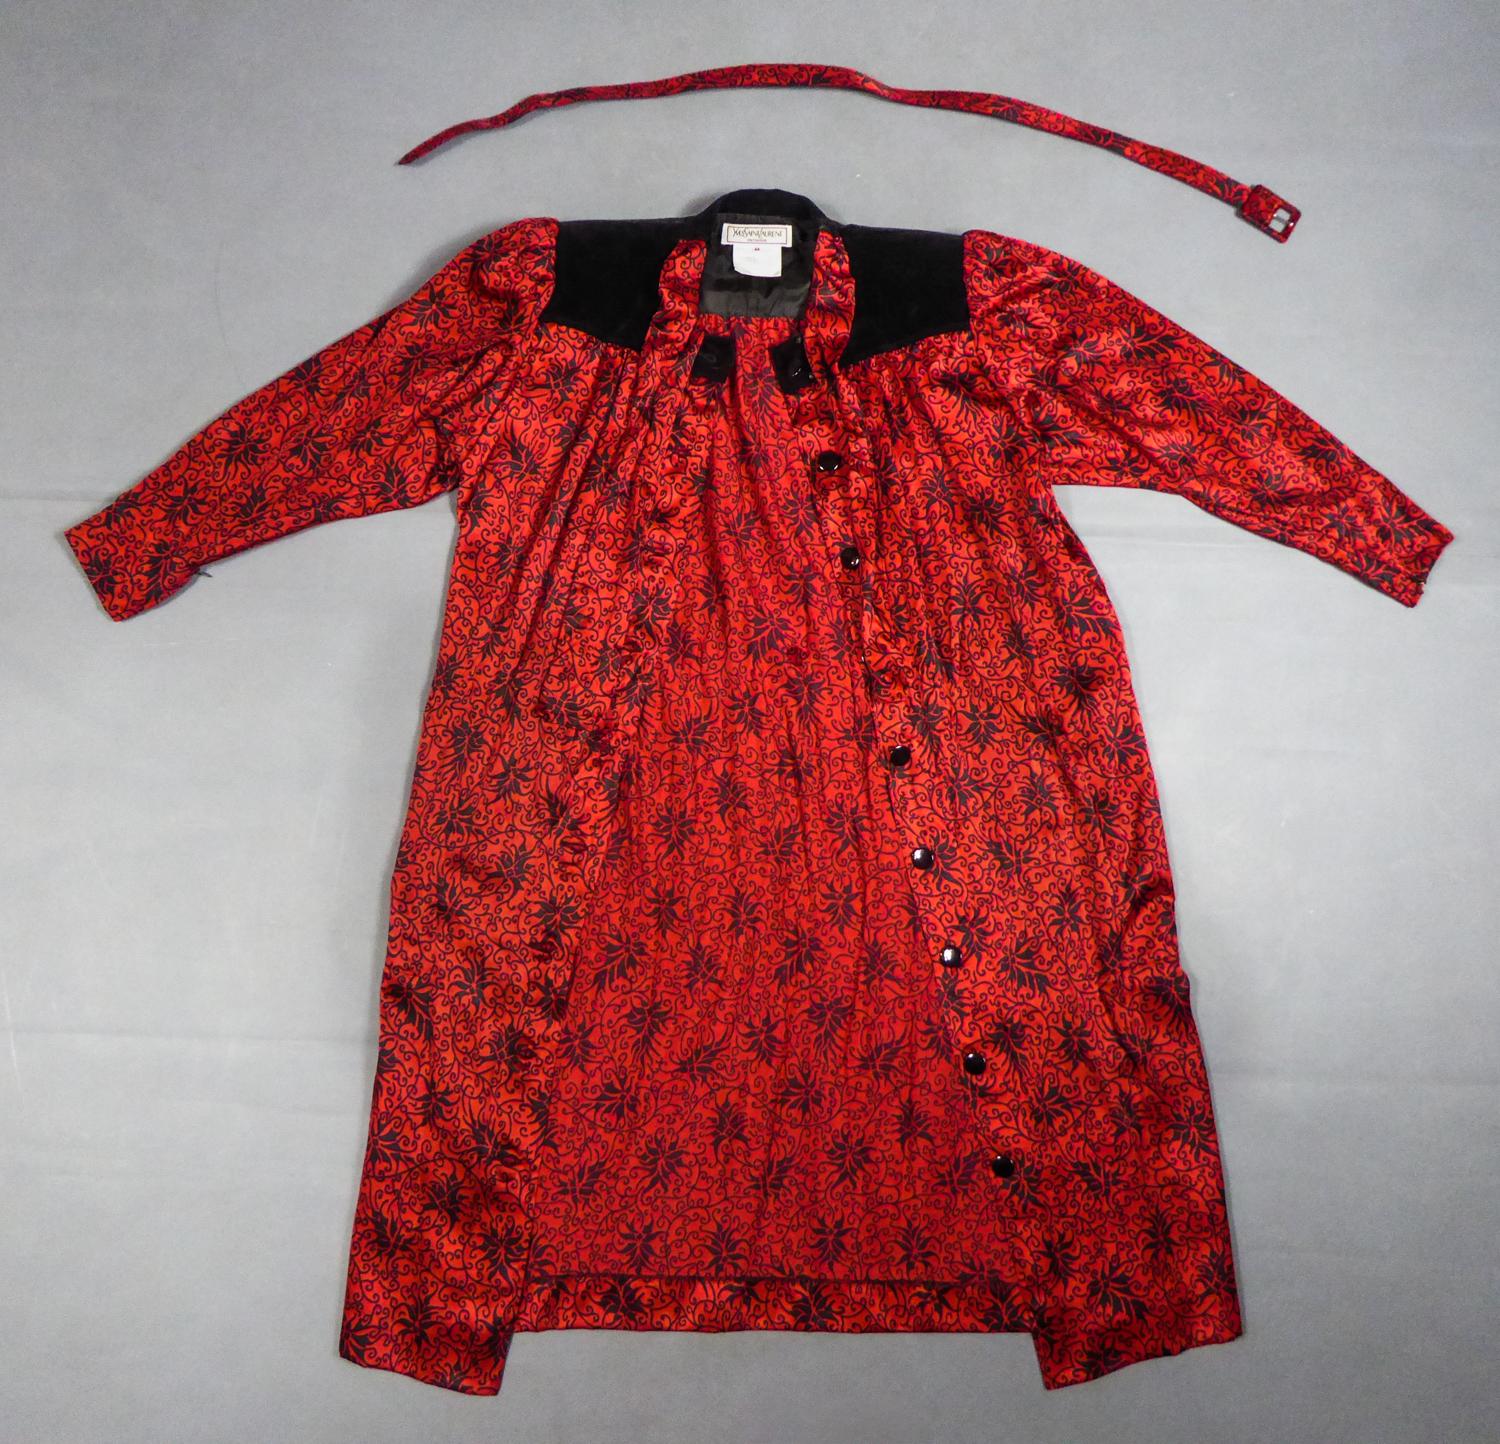 Circa 1990
France

Iconic blouse dress in printed silk satin from the Variation line by Yves Saint Laurent and dating from the 1990s. Beautiful silk satin printed with stylized patterns in illuminations probably from the designer house Staron in